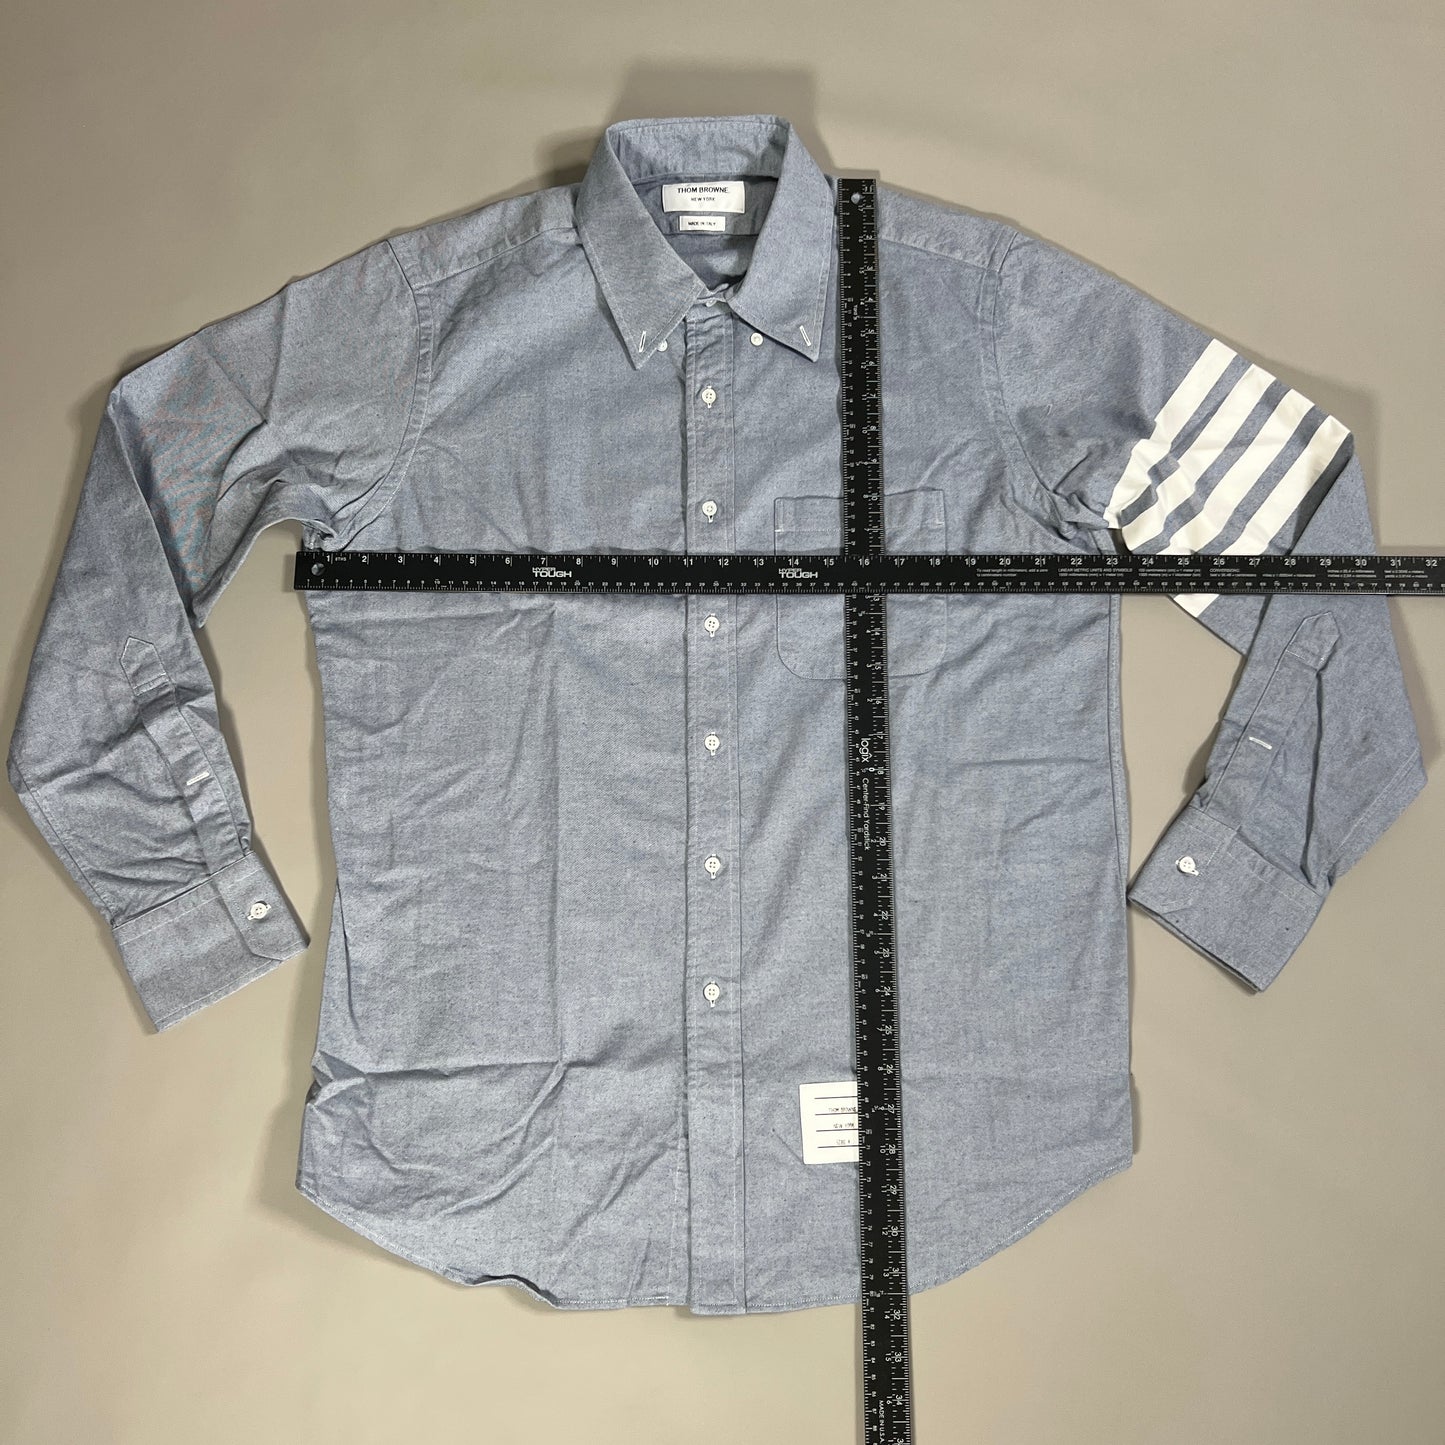 THOM BROWNE Straight Fit BD LS Shirt w/CB RWB GG in Solid Flannel w/woven 4 Bar Stripe in Light Blue Size 4 (NEW)